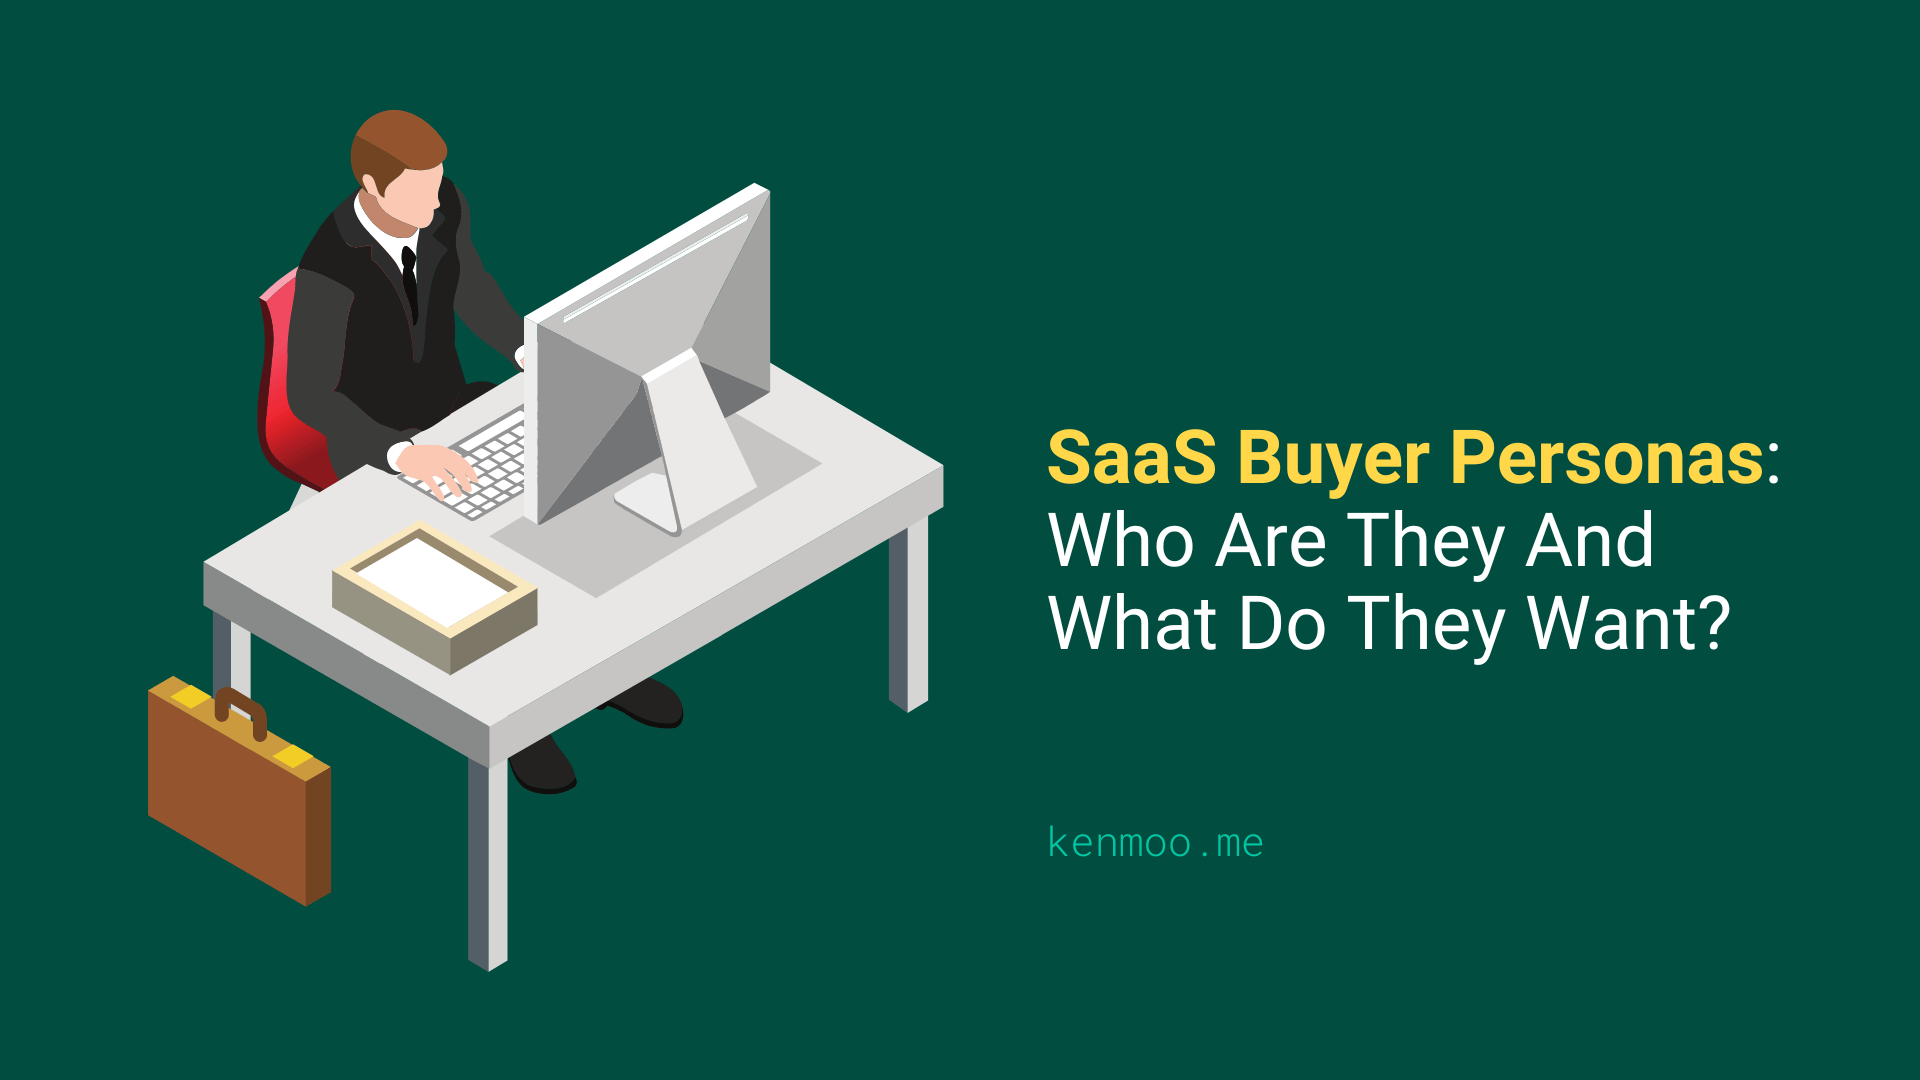 SaaS Buyer Personas: Who Are They And What Do They Want?